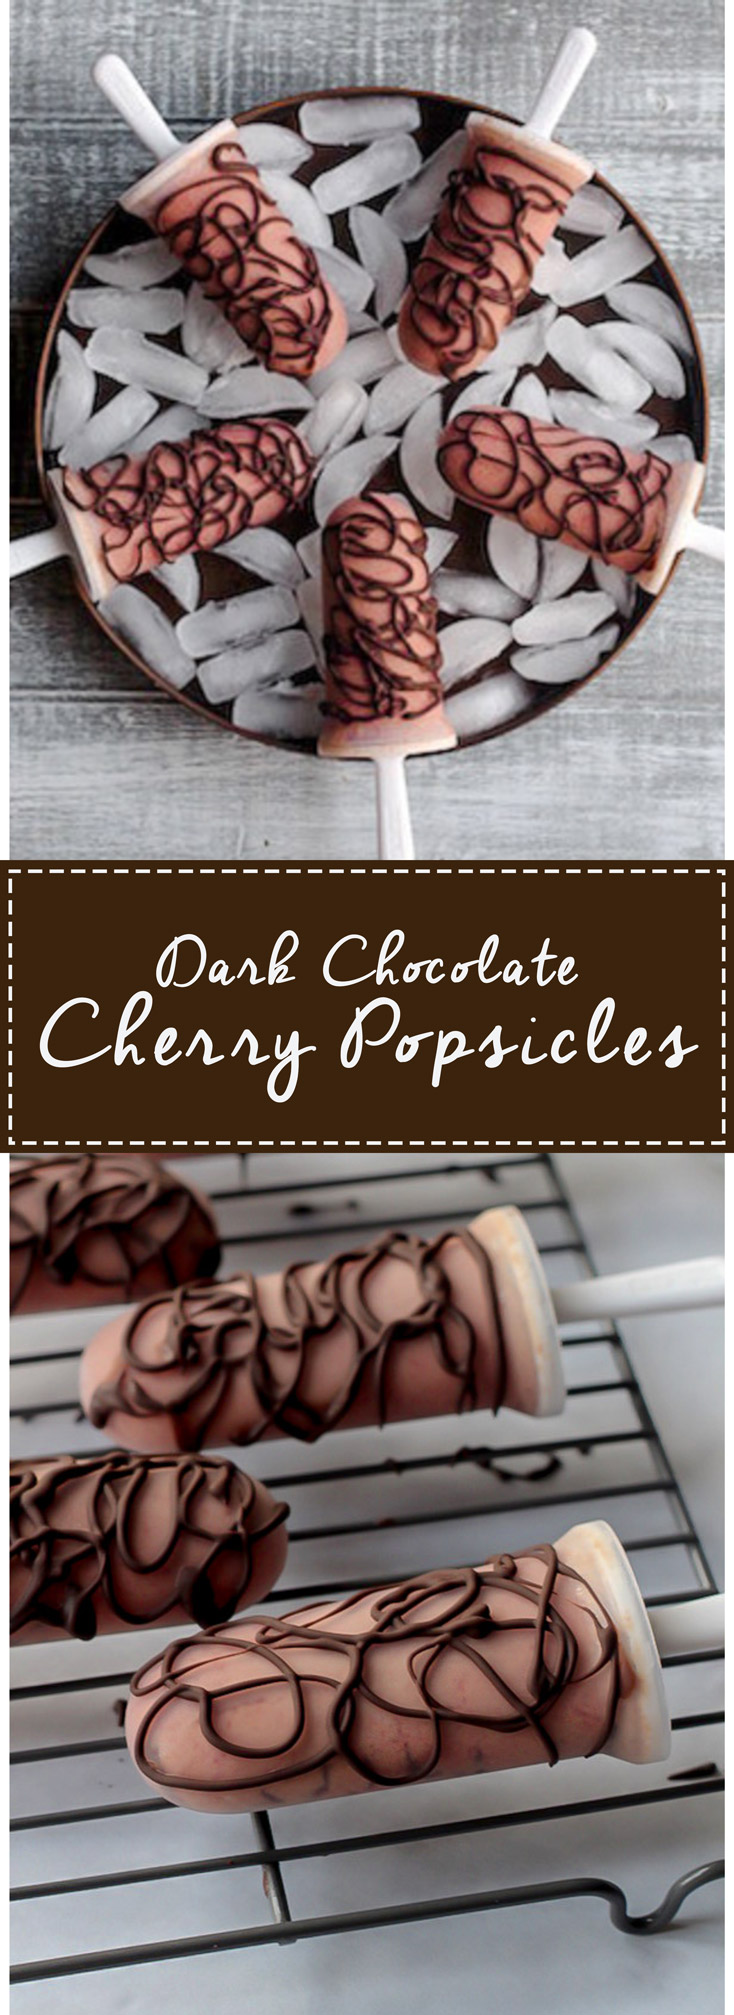 Dark Chocolate Cherry Popsicles made from 4 whole food ingredients. Yummy, and so much healthier than store bought popsicles!